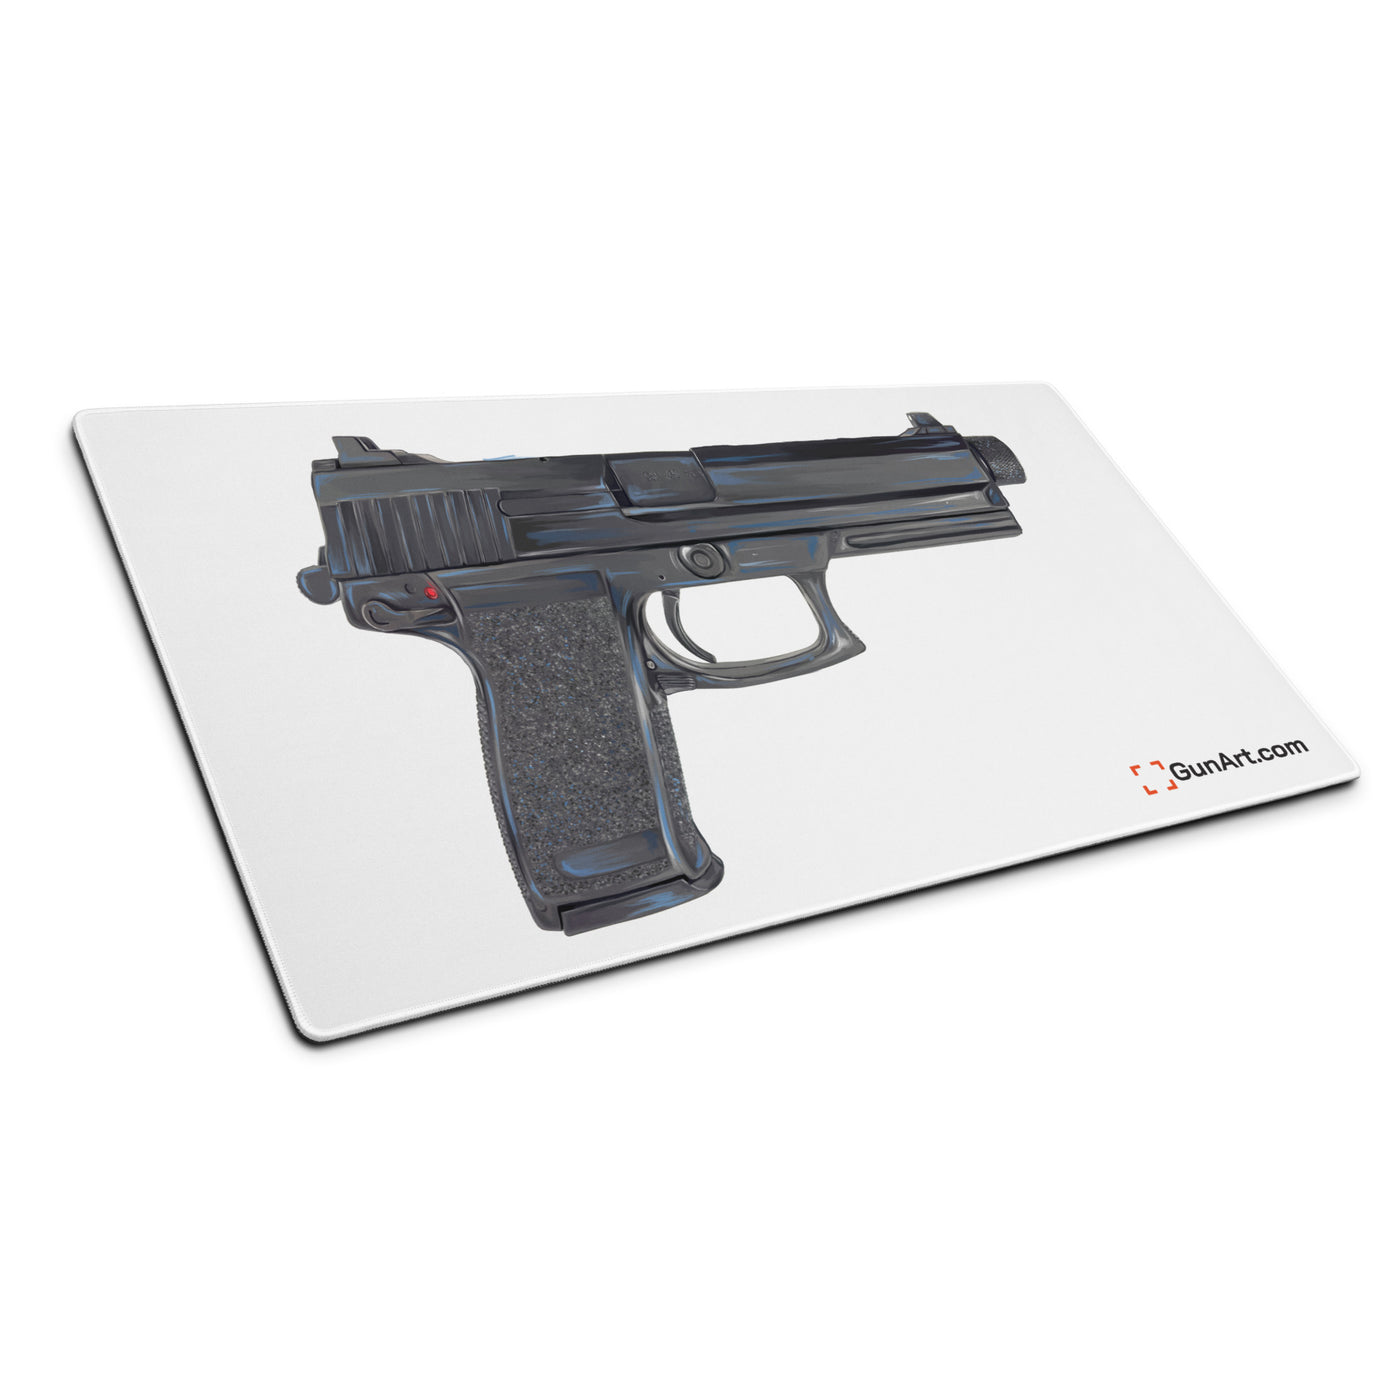 Tactical .45 ACP Poly Pistol Gaming Mouse Pad - Just The Piece - White Background